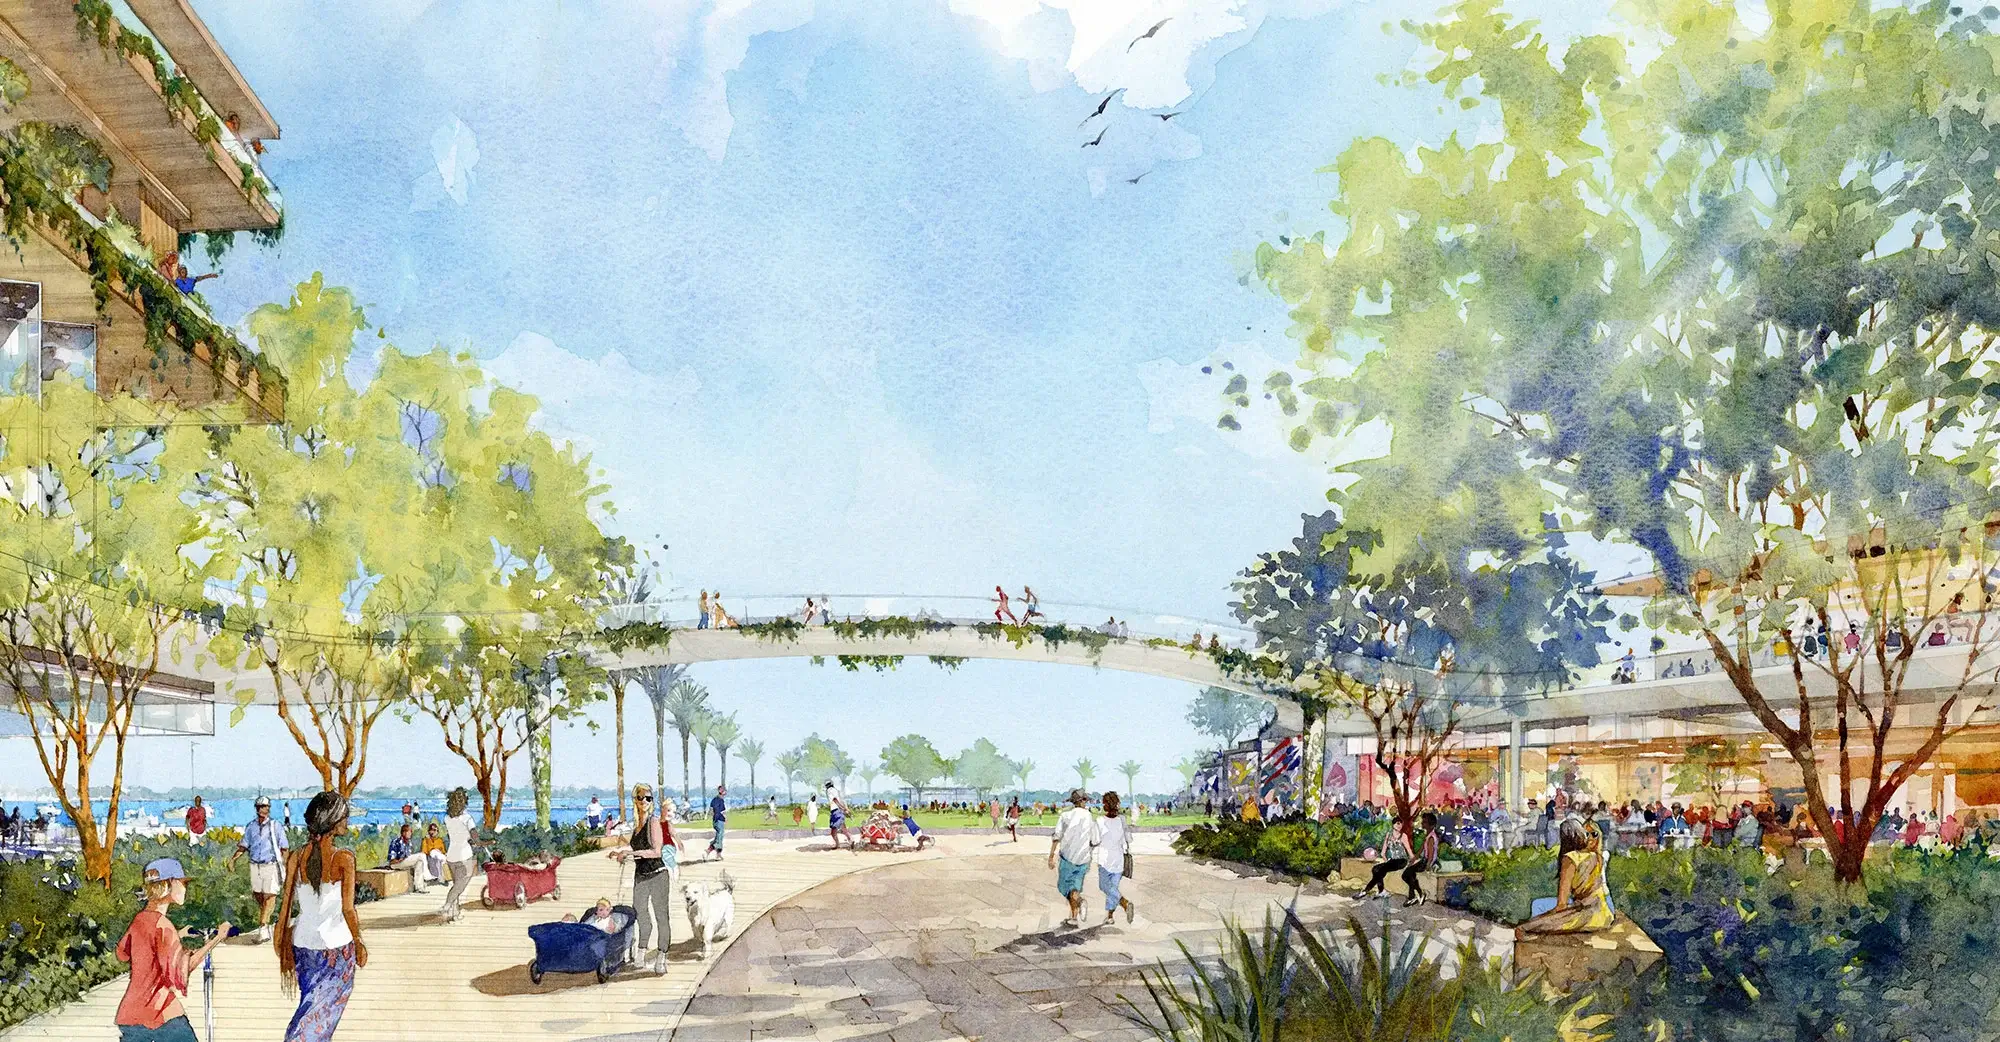 Artist rendering of people walking and gathering in park space and along the boardwalk.